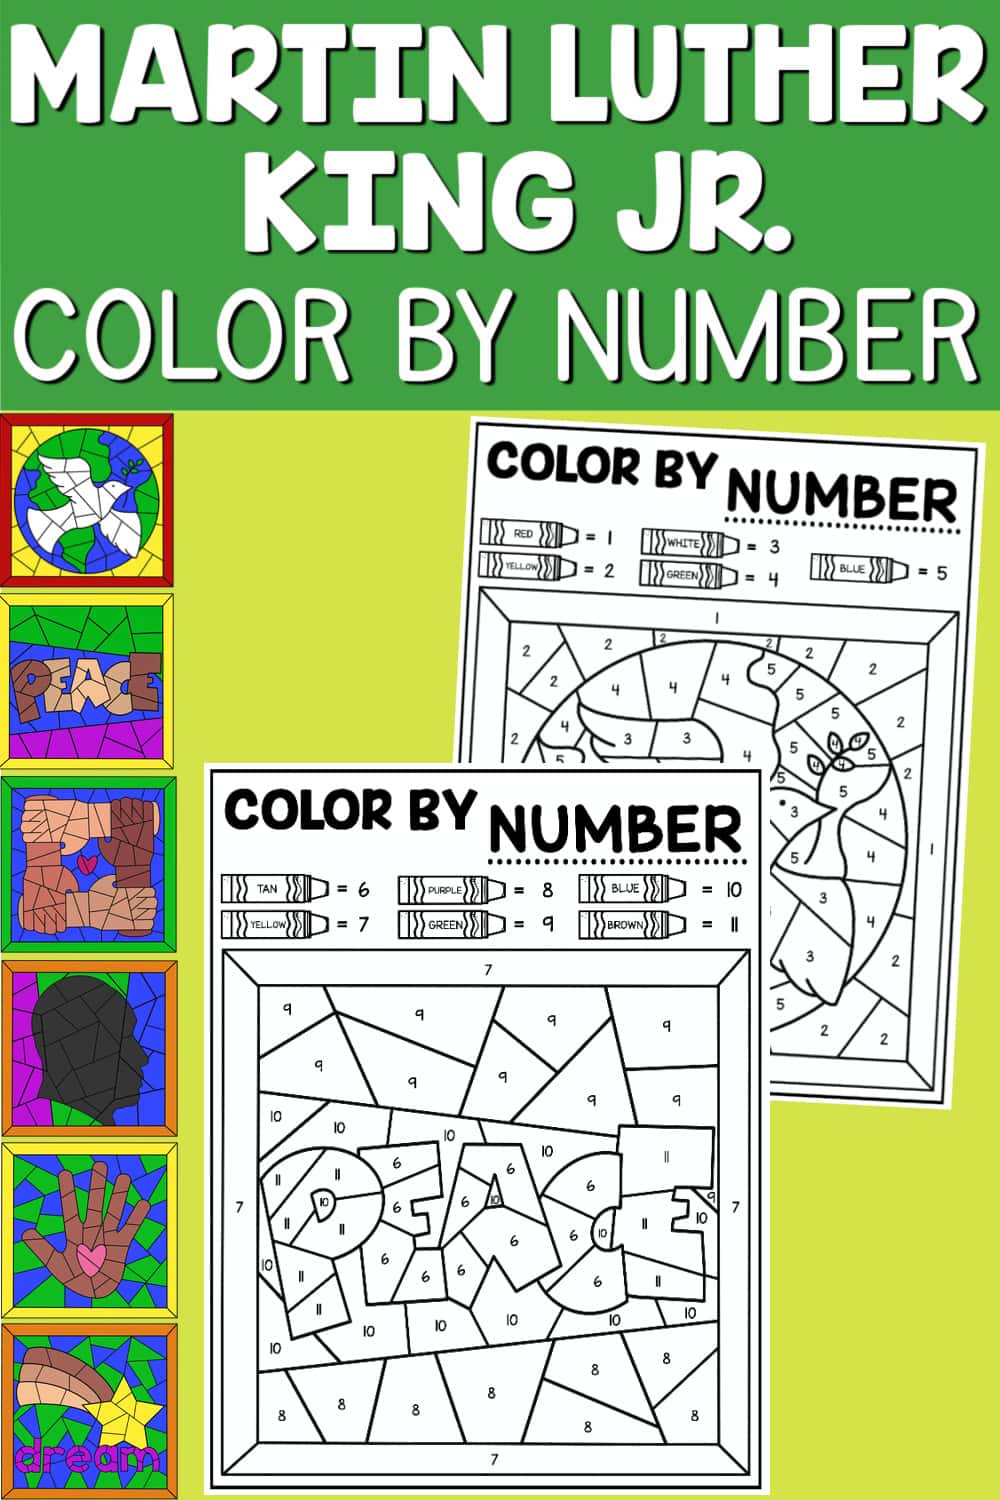 The perfect Martin Luther King, Jr. activity for kids! Grab these six free printable Color by Number Pages to follow up your lessons.